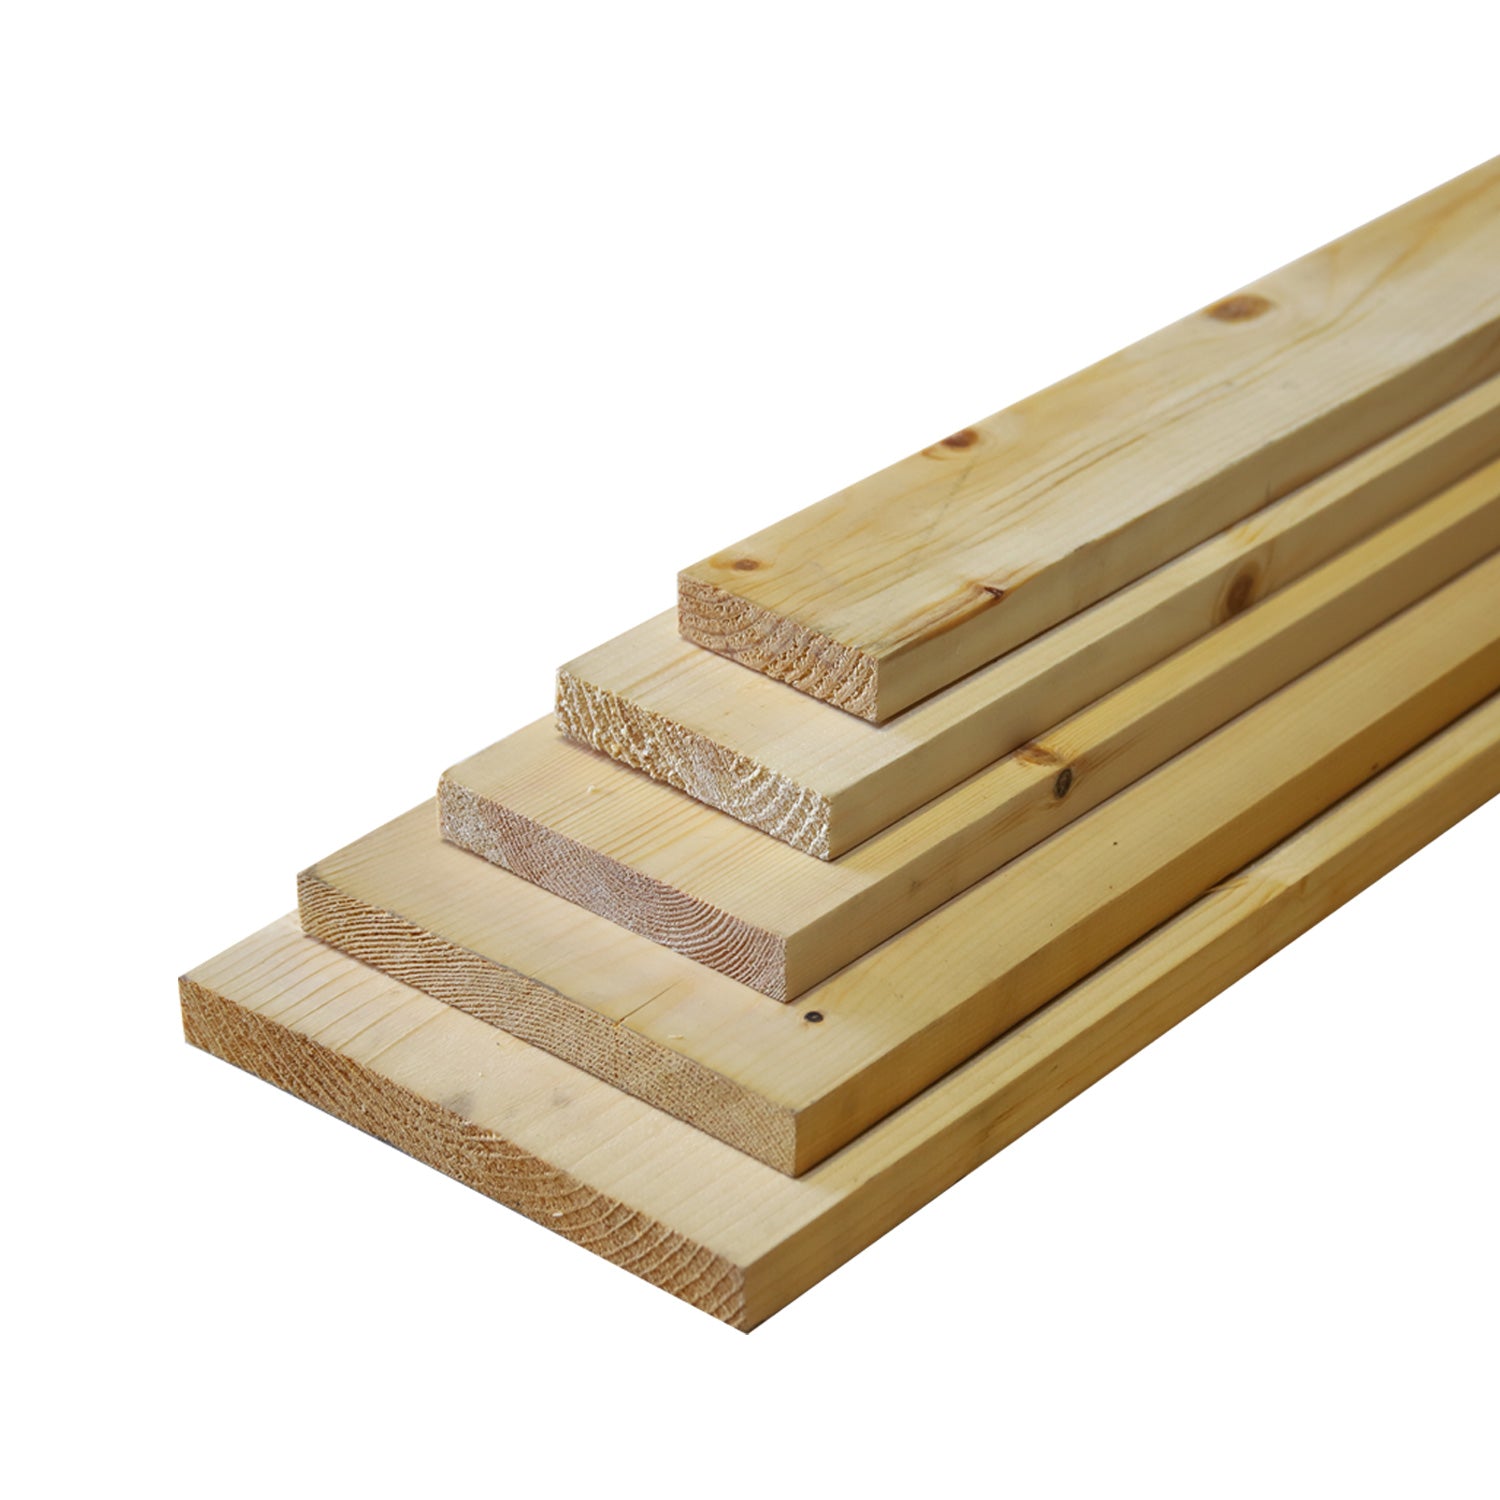 1'' x 1" planed timber